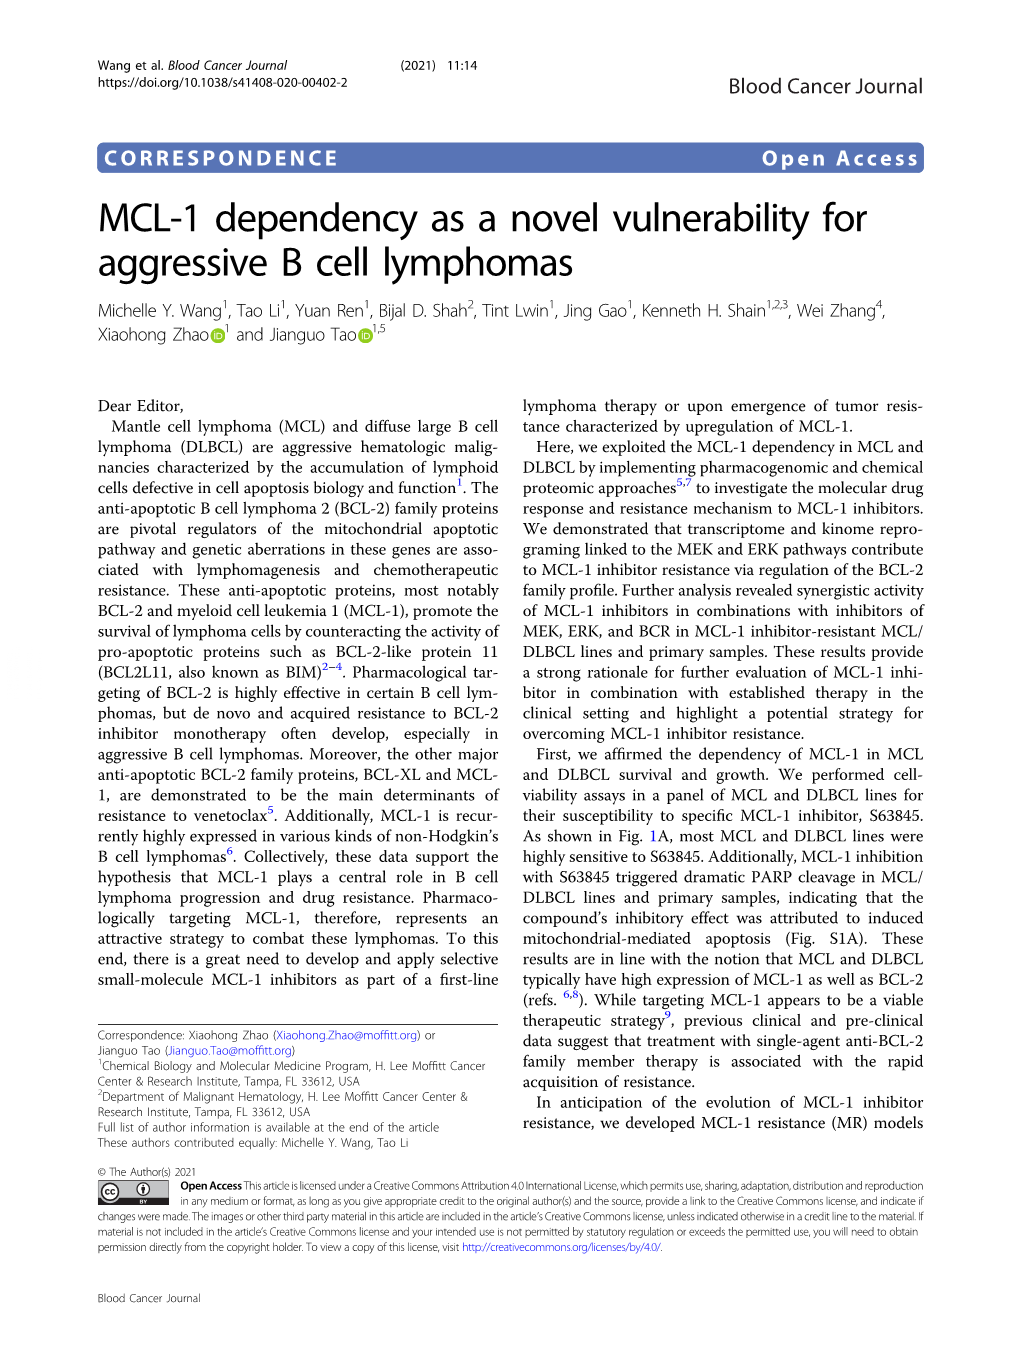 MCL-1 Dependency As a Novel Vulnerability for Aggressive B Cell Lymphomas Michelle Y